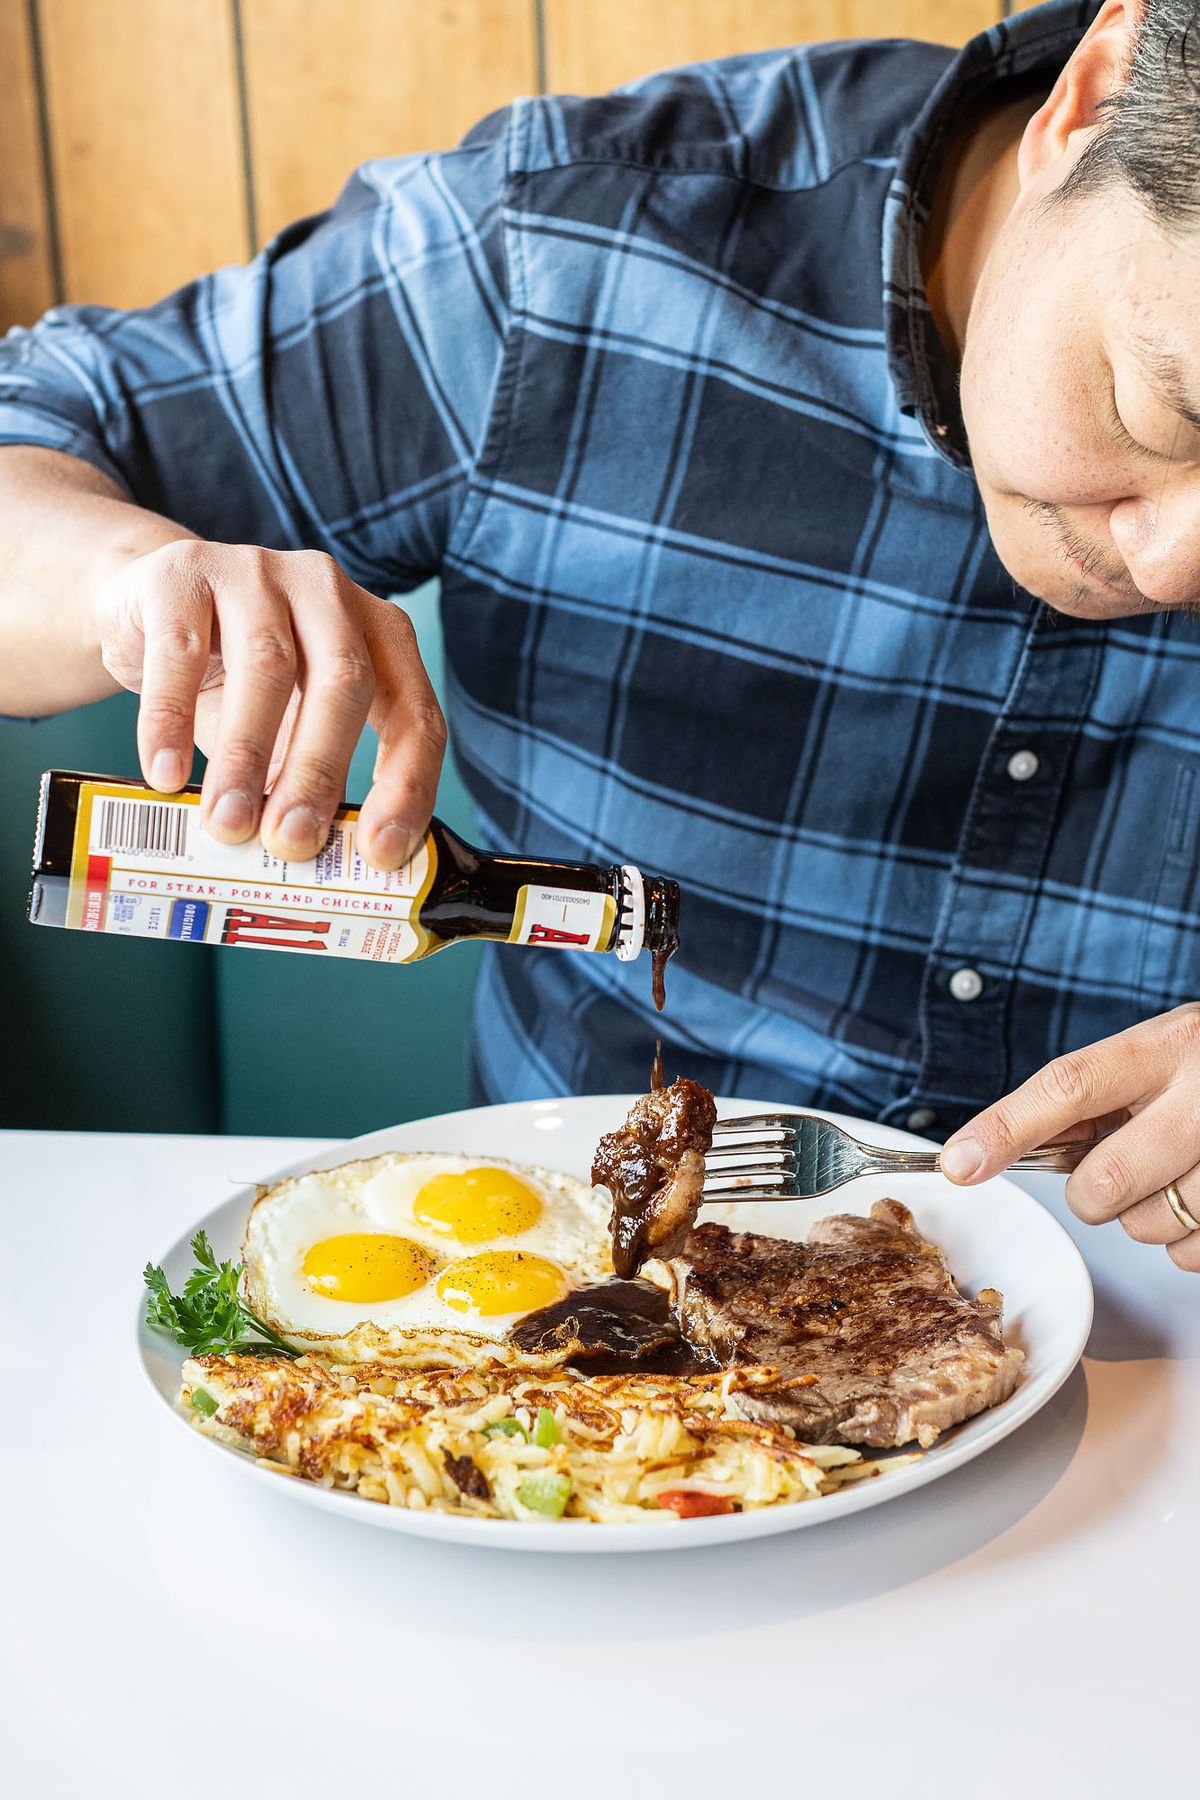 Man pouring bottle of A1 sauce on a plate containing eggs, steak, and hash browns.